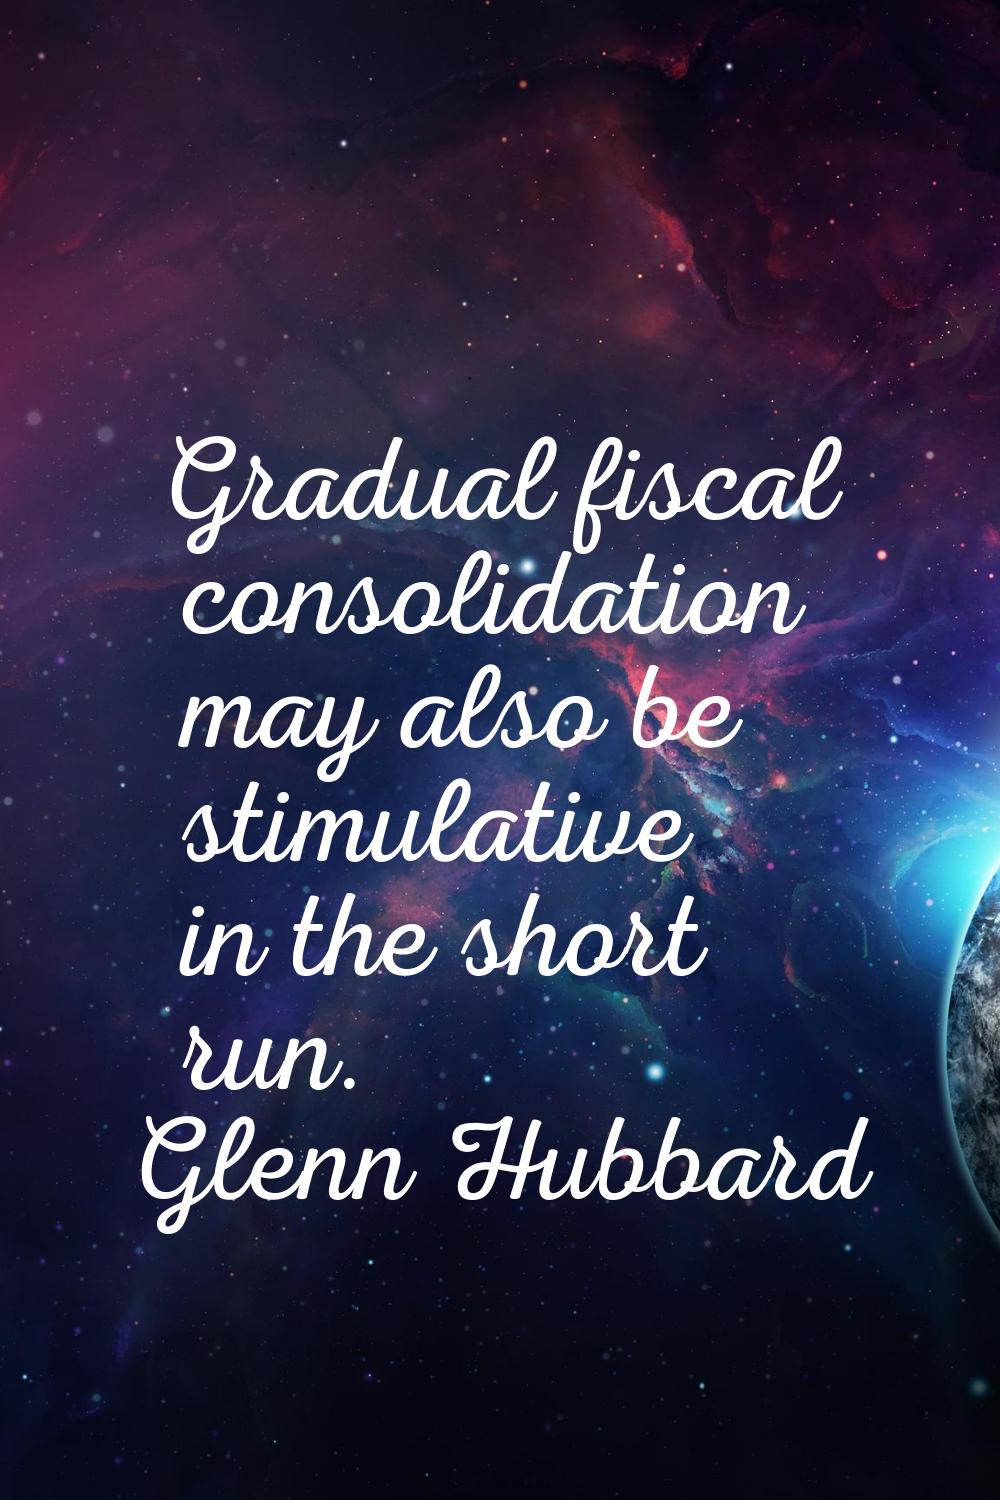 Gradual fiscal consolidation may also be stimulative in the short run.